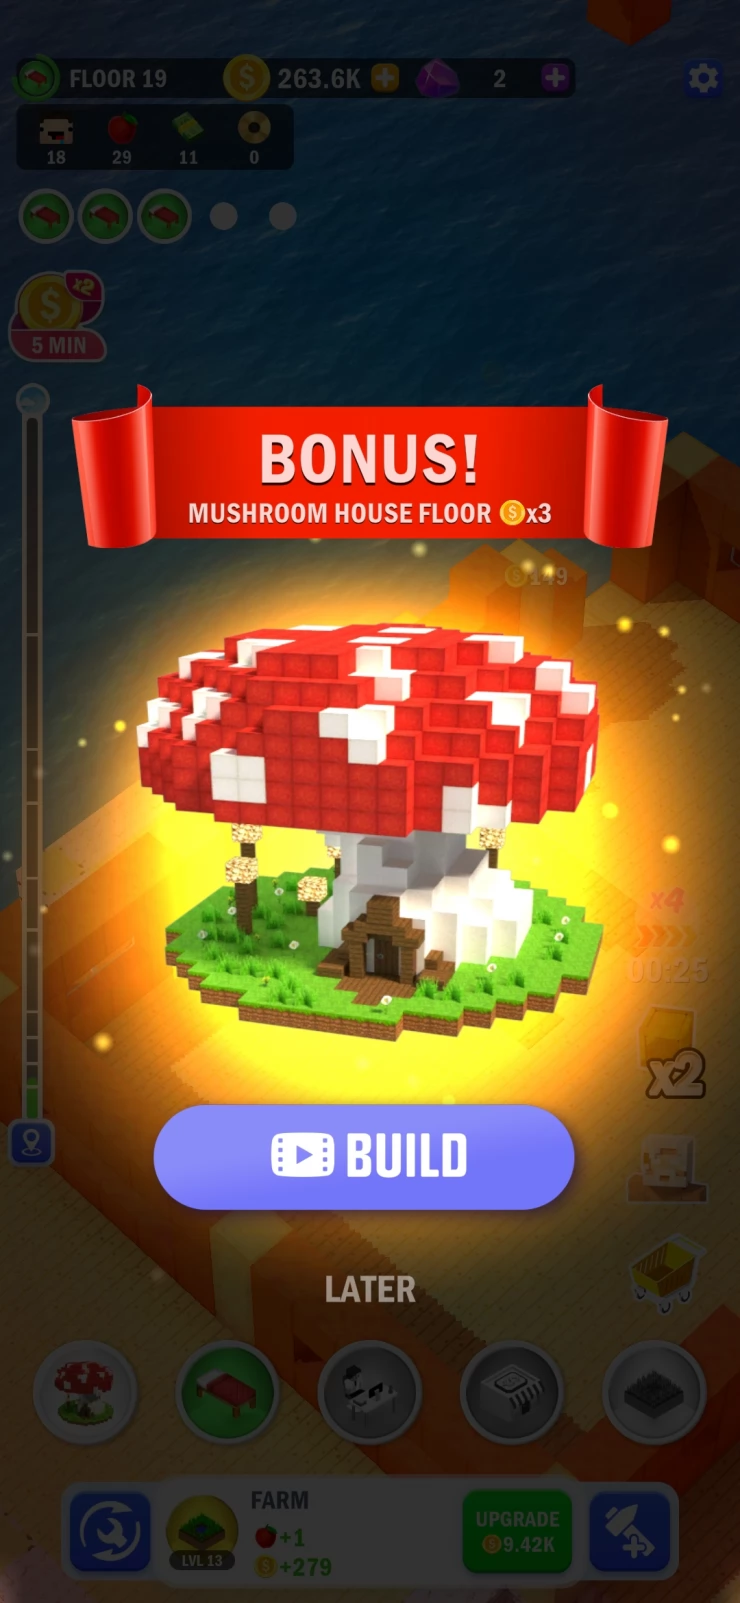 You get the option to build special floors from time to time for extra cash